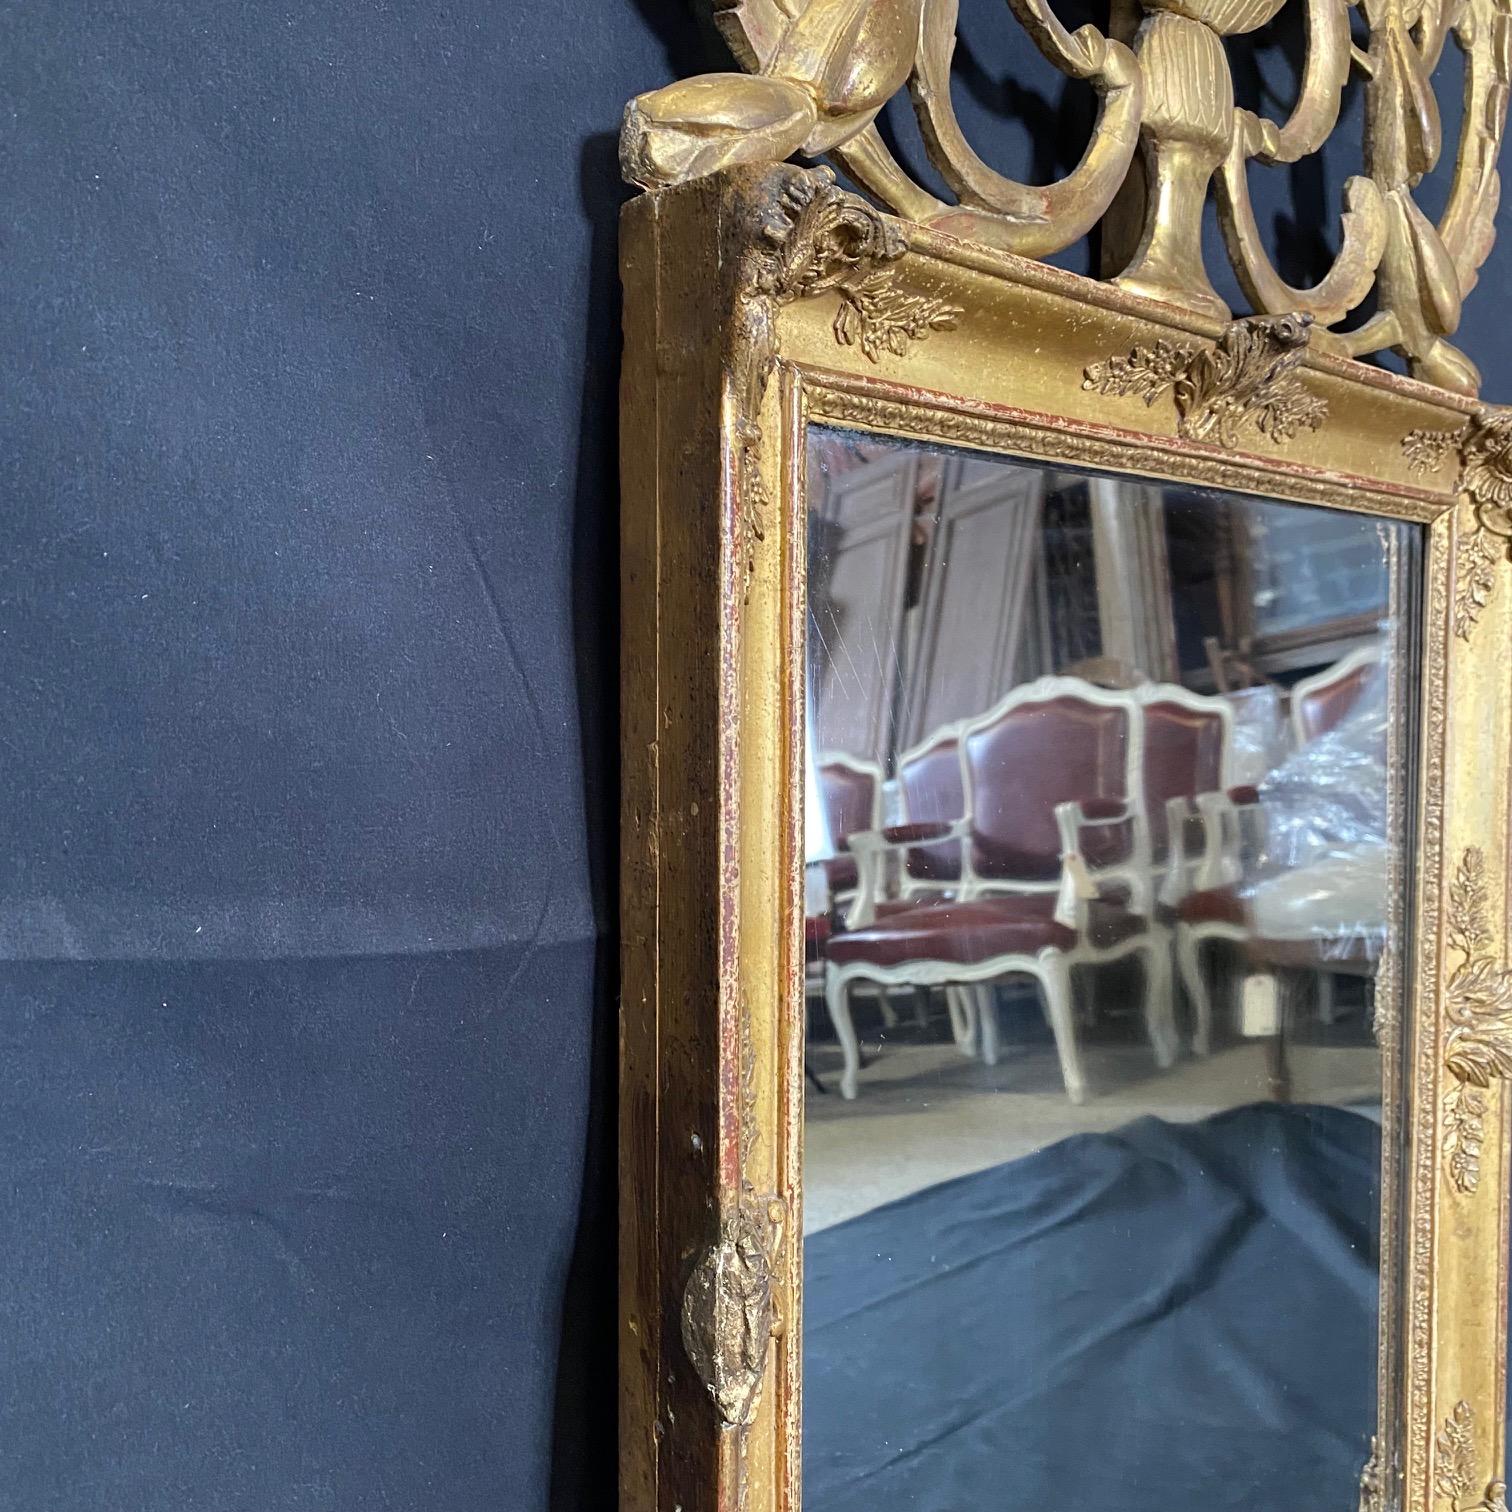 Rare Gem French Antique Louis XVI Mirror with Intricate Fronton Carving  For Sale 6